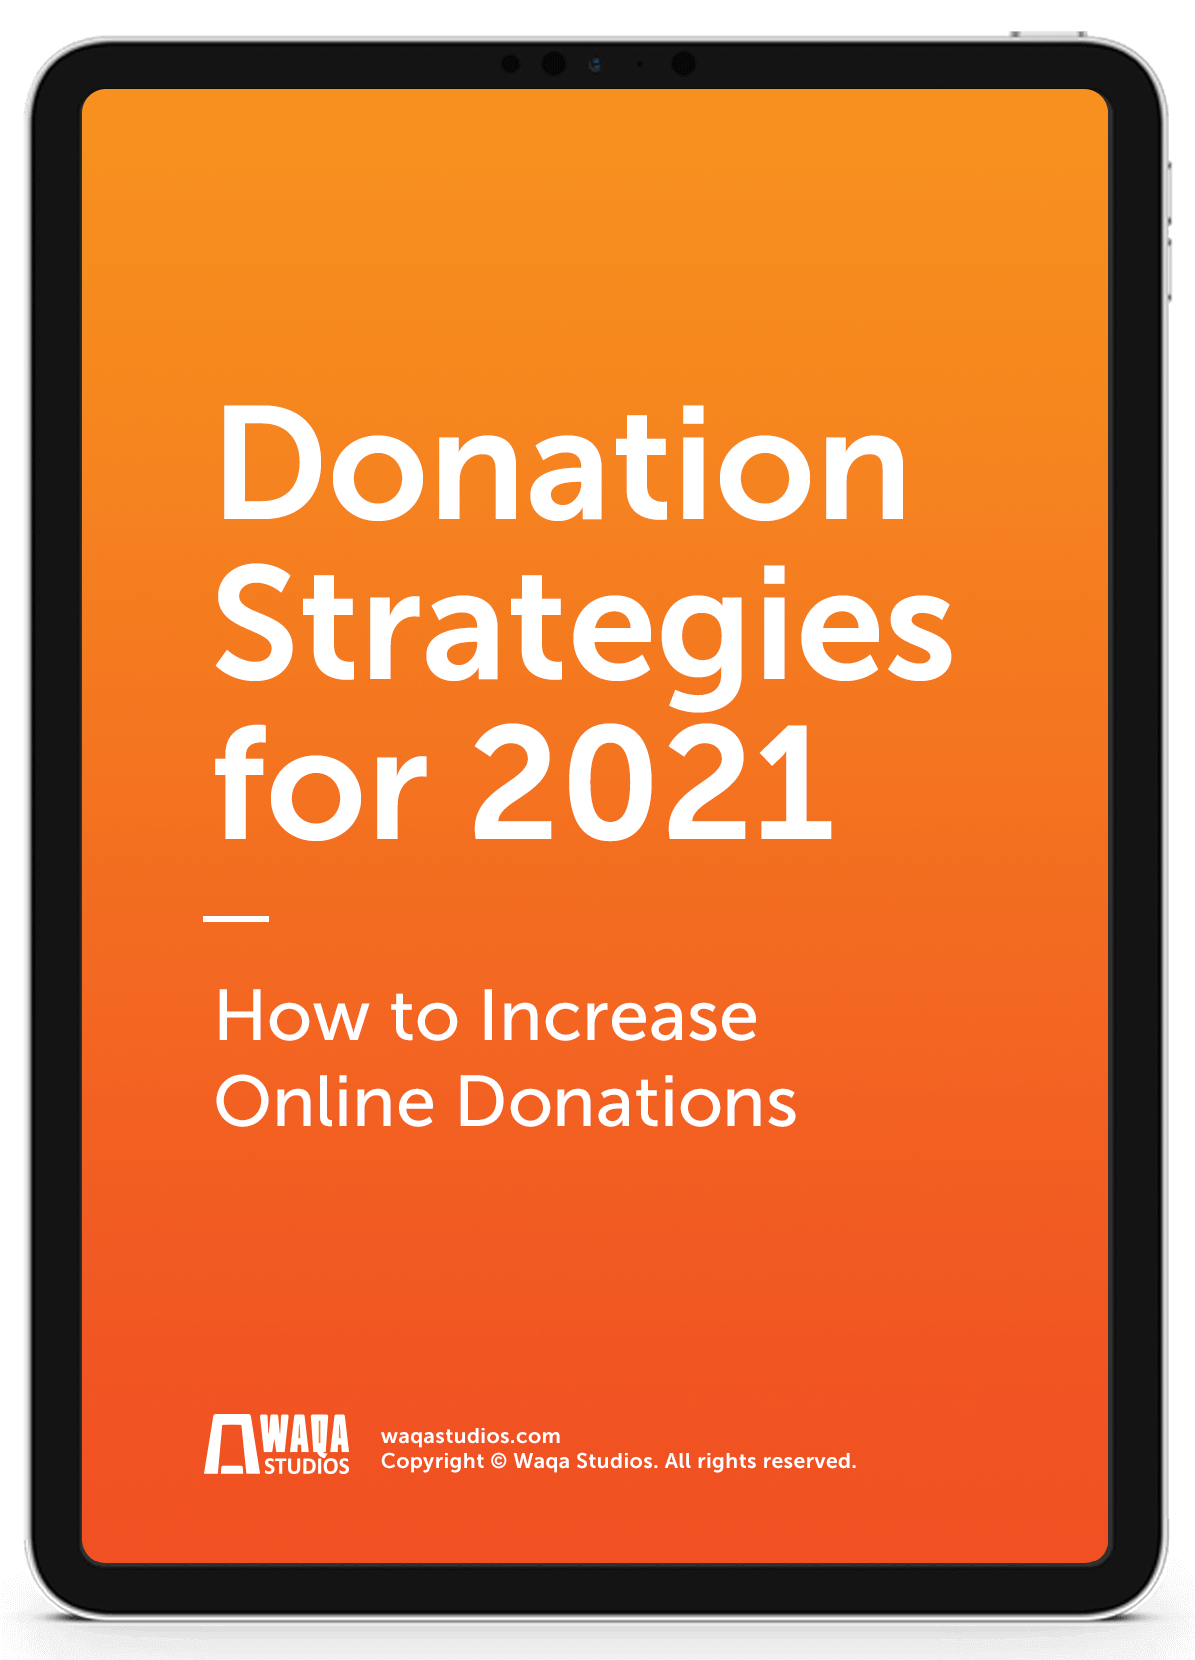 Donation Strategies for 2019 - Free Download guide for nonprofits and charities